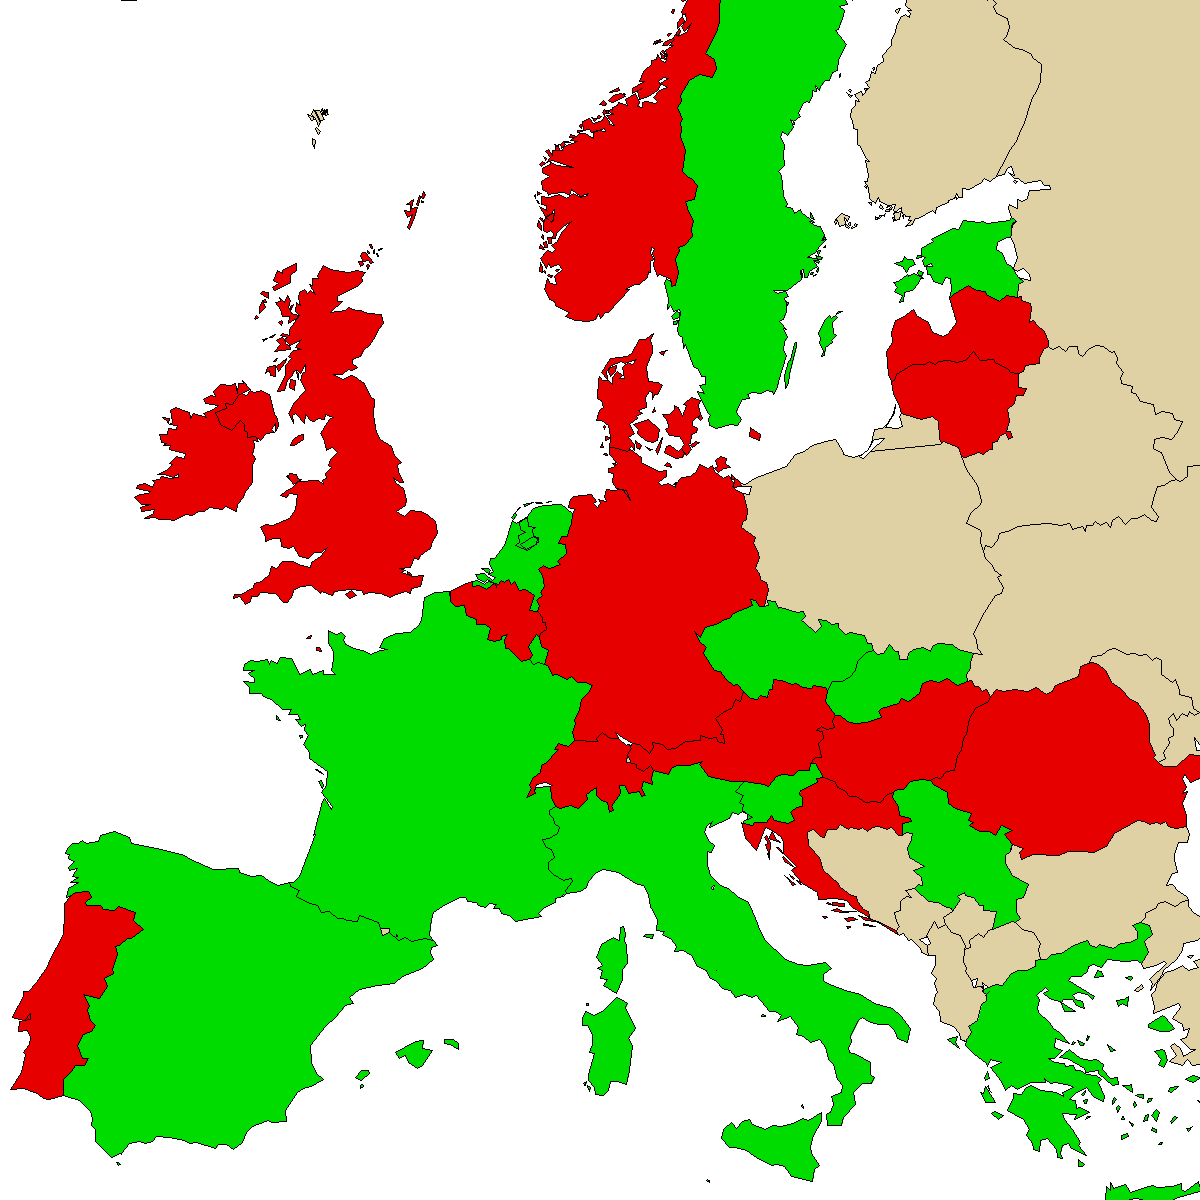 legal info map for our product 3MMA, green are countries with no ban, red with ban, grey is unknown